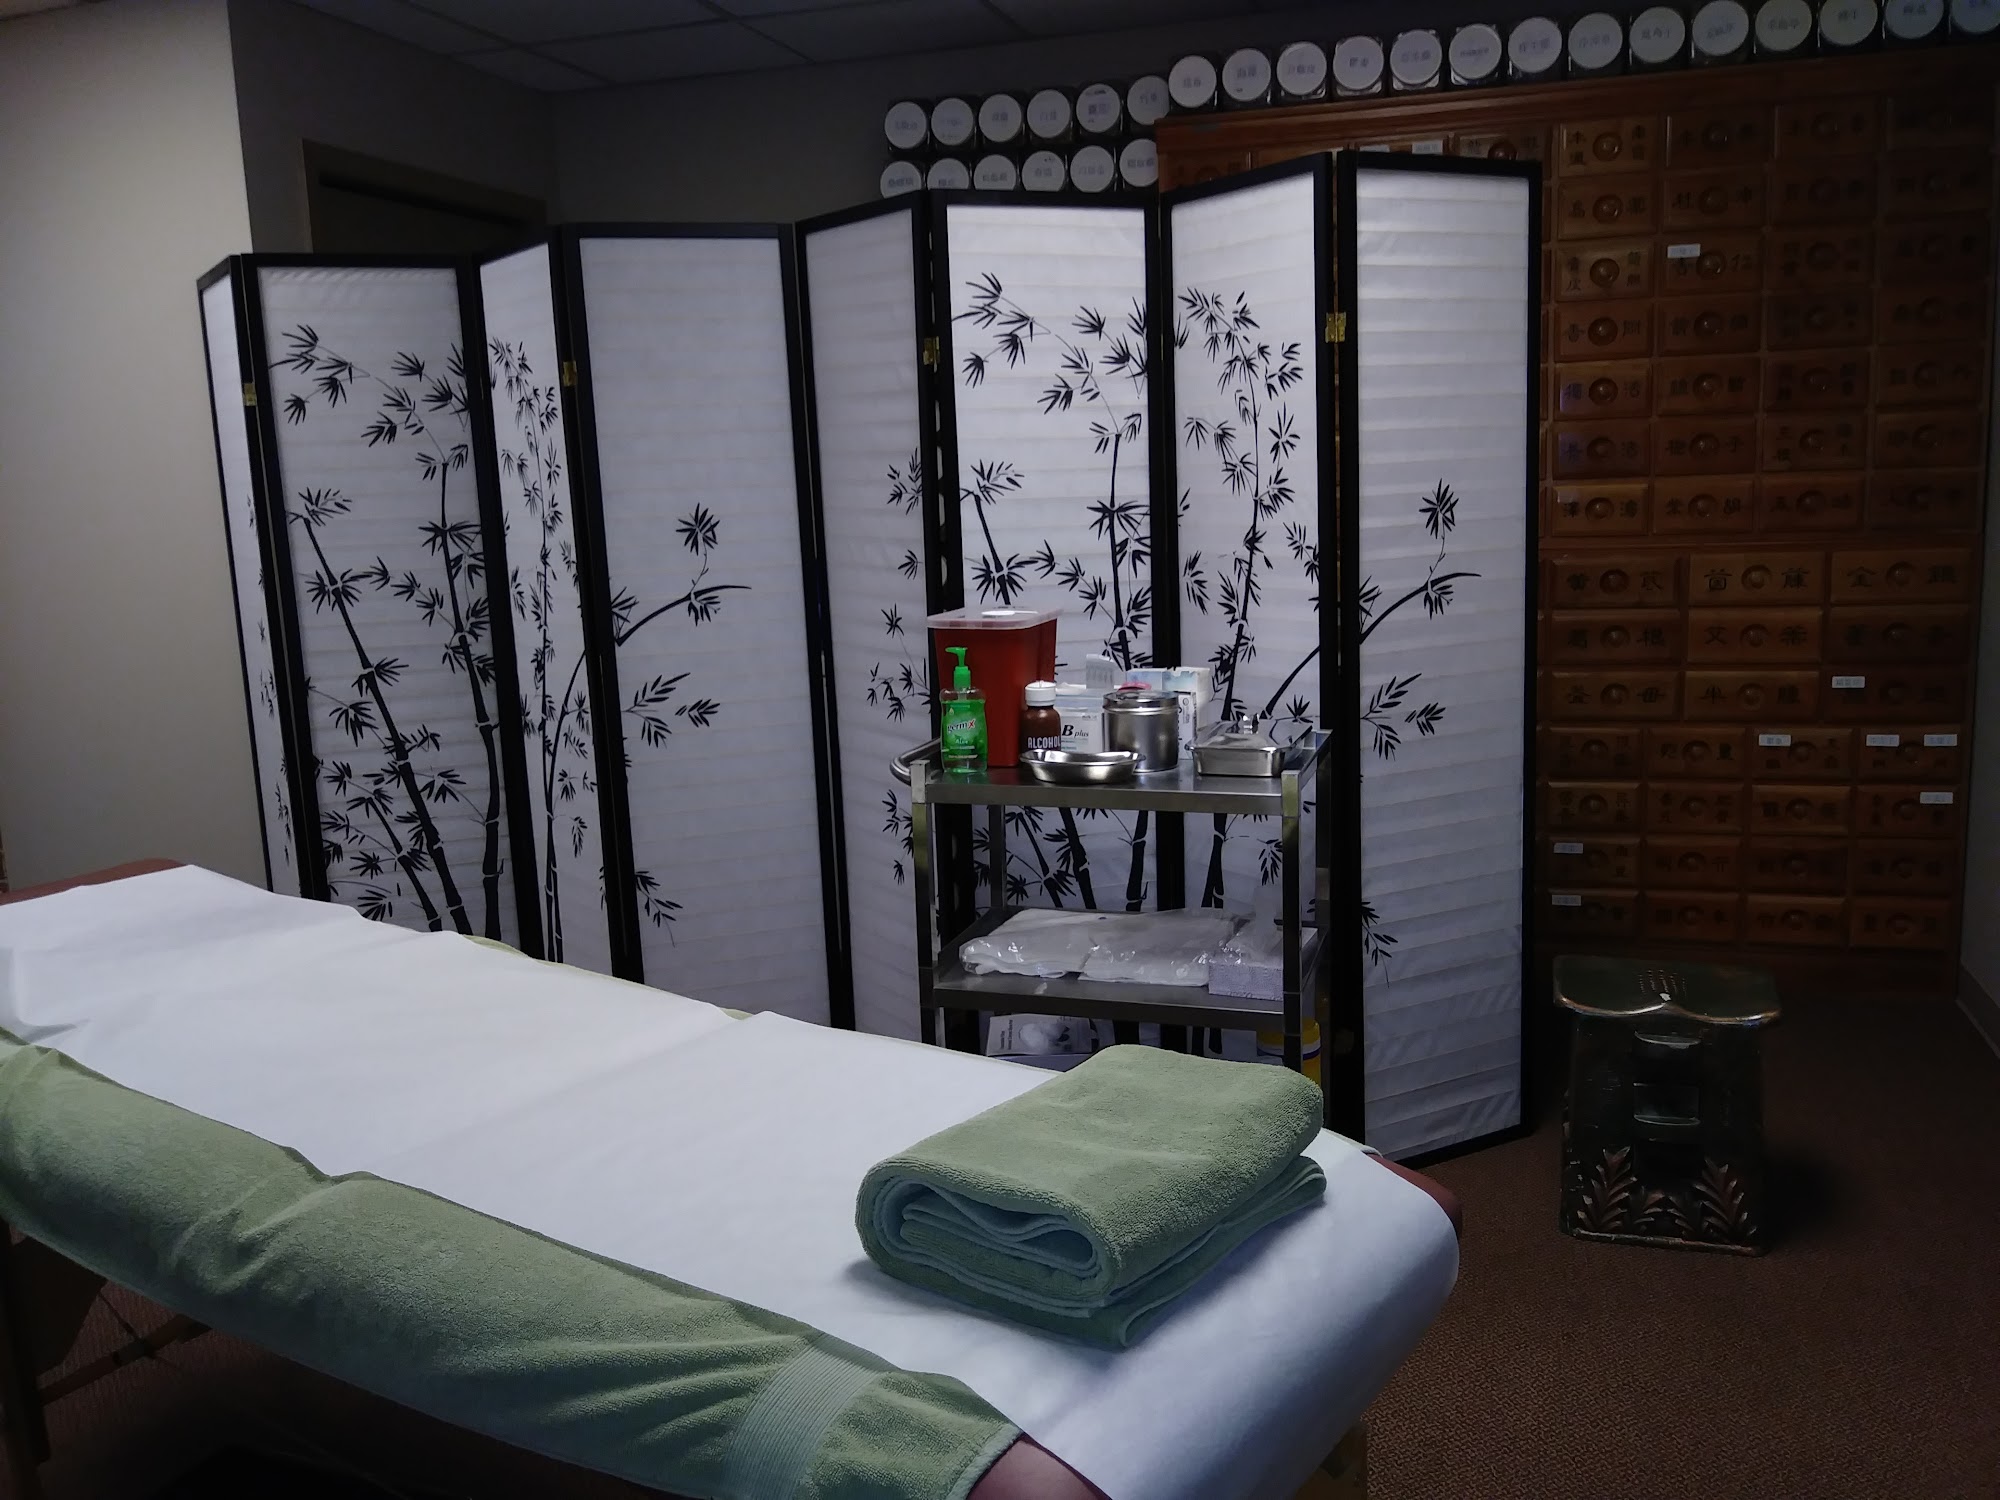 Serenity Acupuncture & Herb